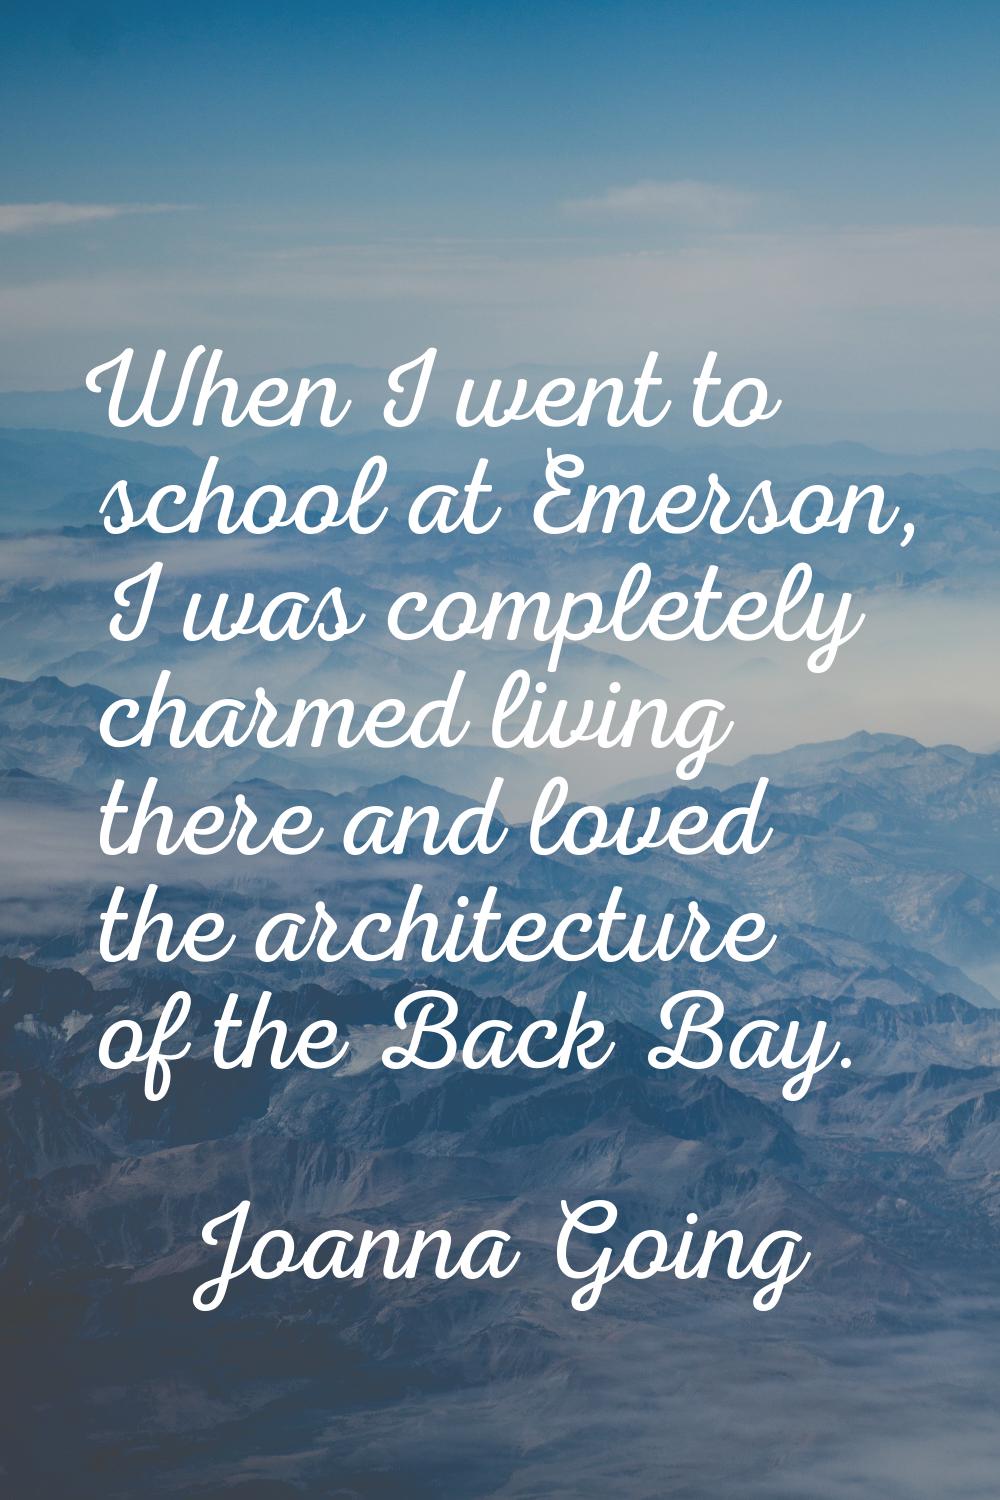 When I went to school at Emerson, I was completely charmed living there and loved the architecture 